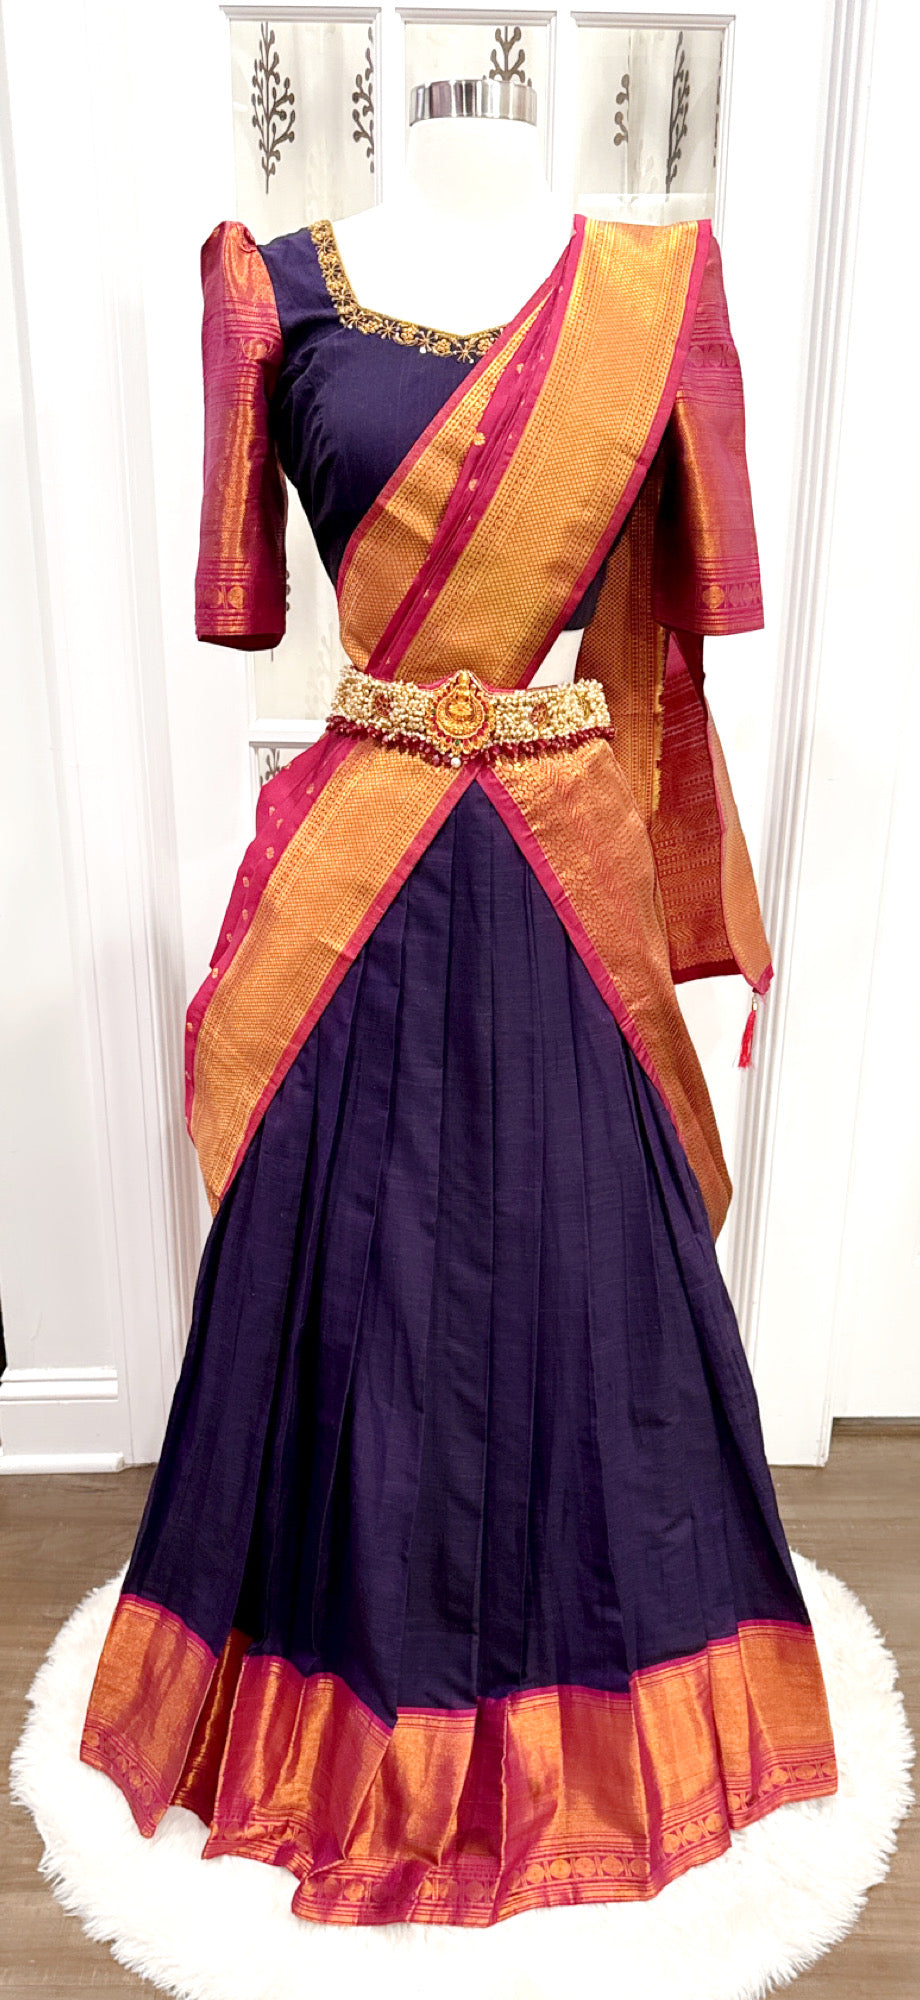 Pure and Soft Narayanpet cotton half saree with Maggam work blouse and elegant matching silk dupatta .